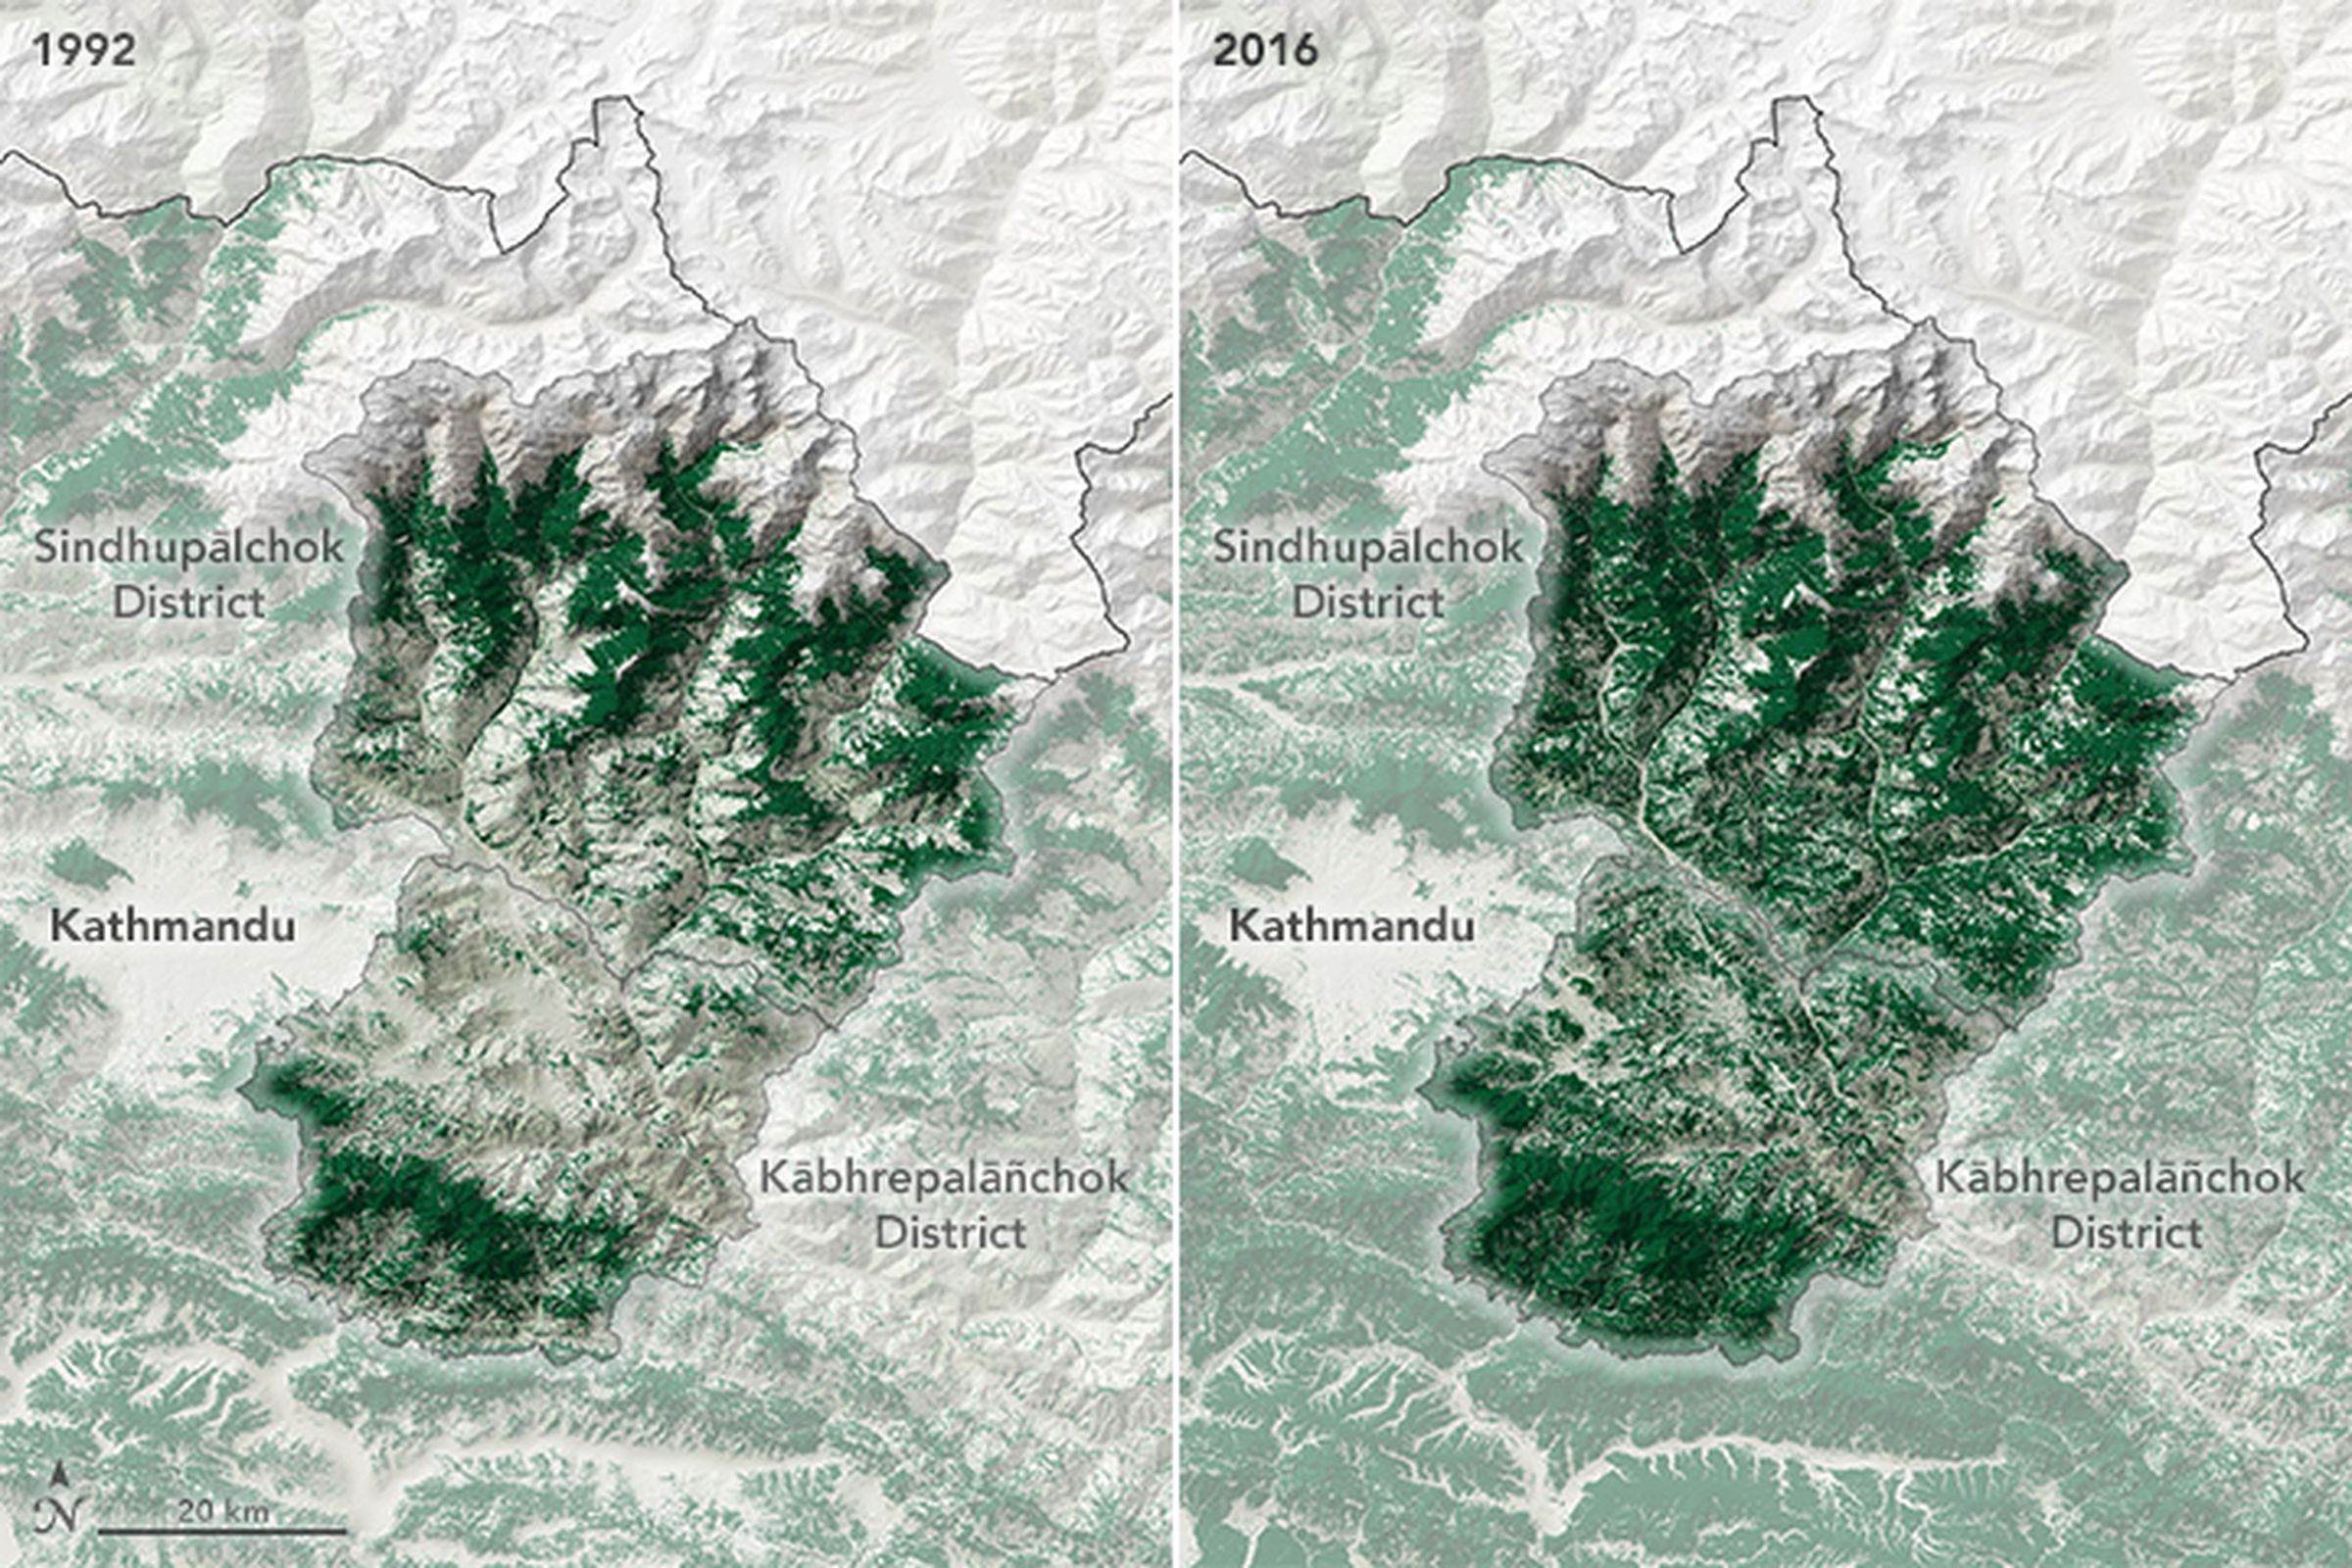 A map on the left shows an area with green spots, indicating decreasing forest cover in 1992. A map on the right shows the area with much more colored dark green, indicating increased forest cover in 2016.